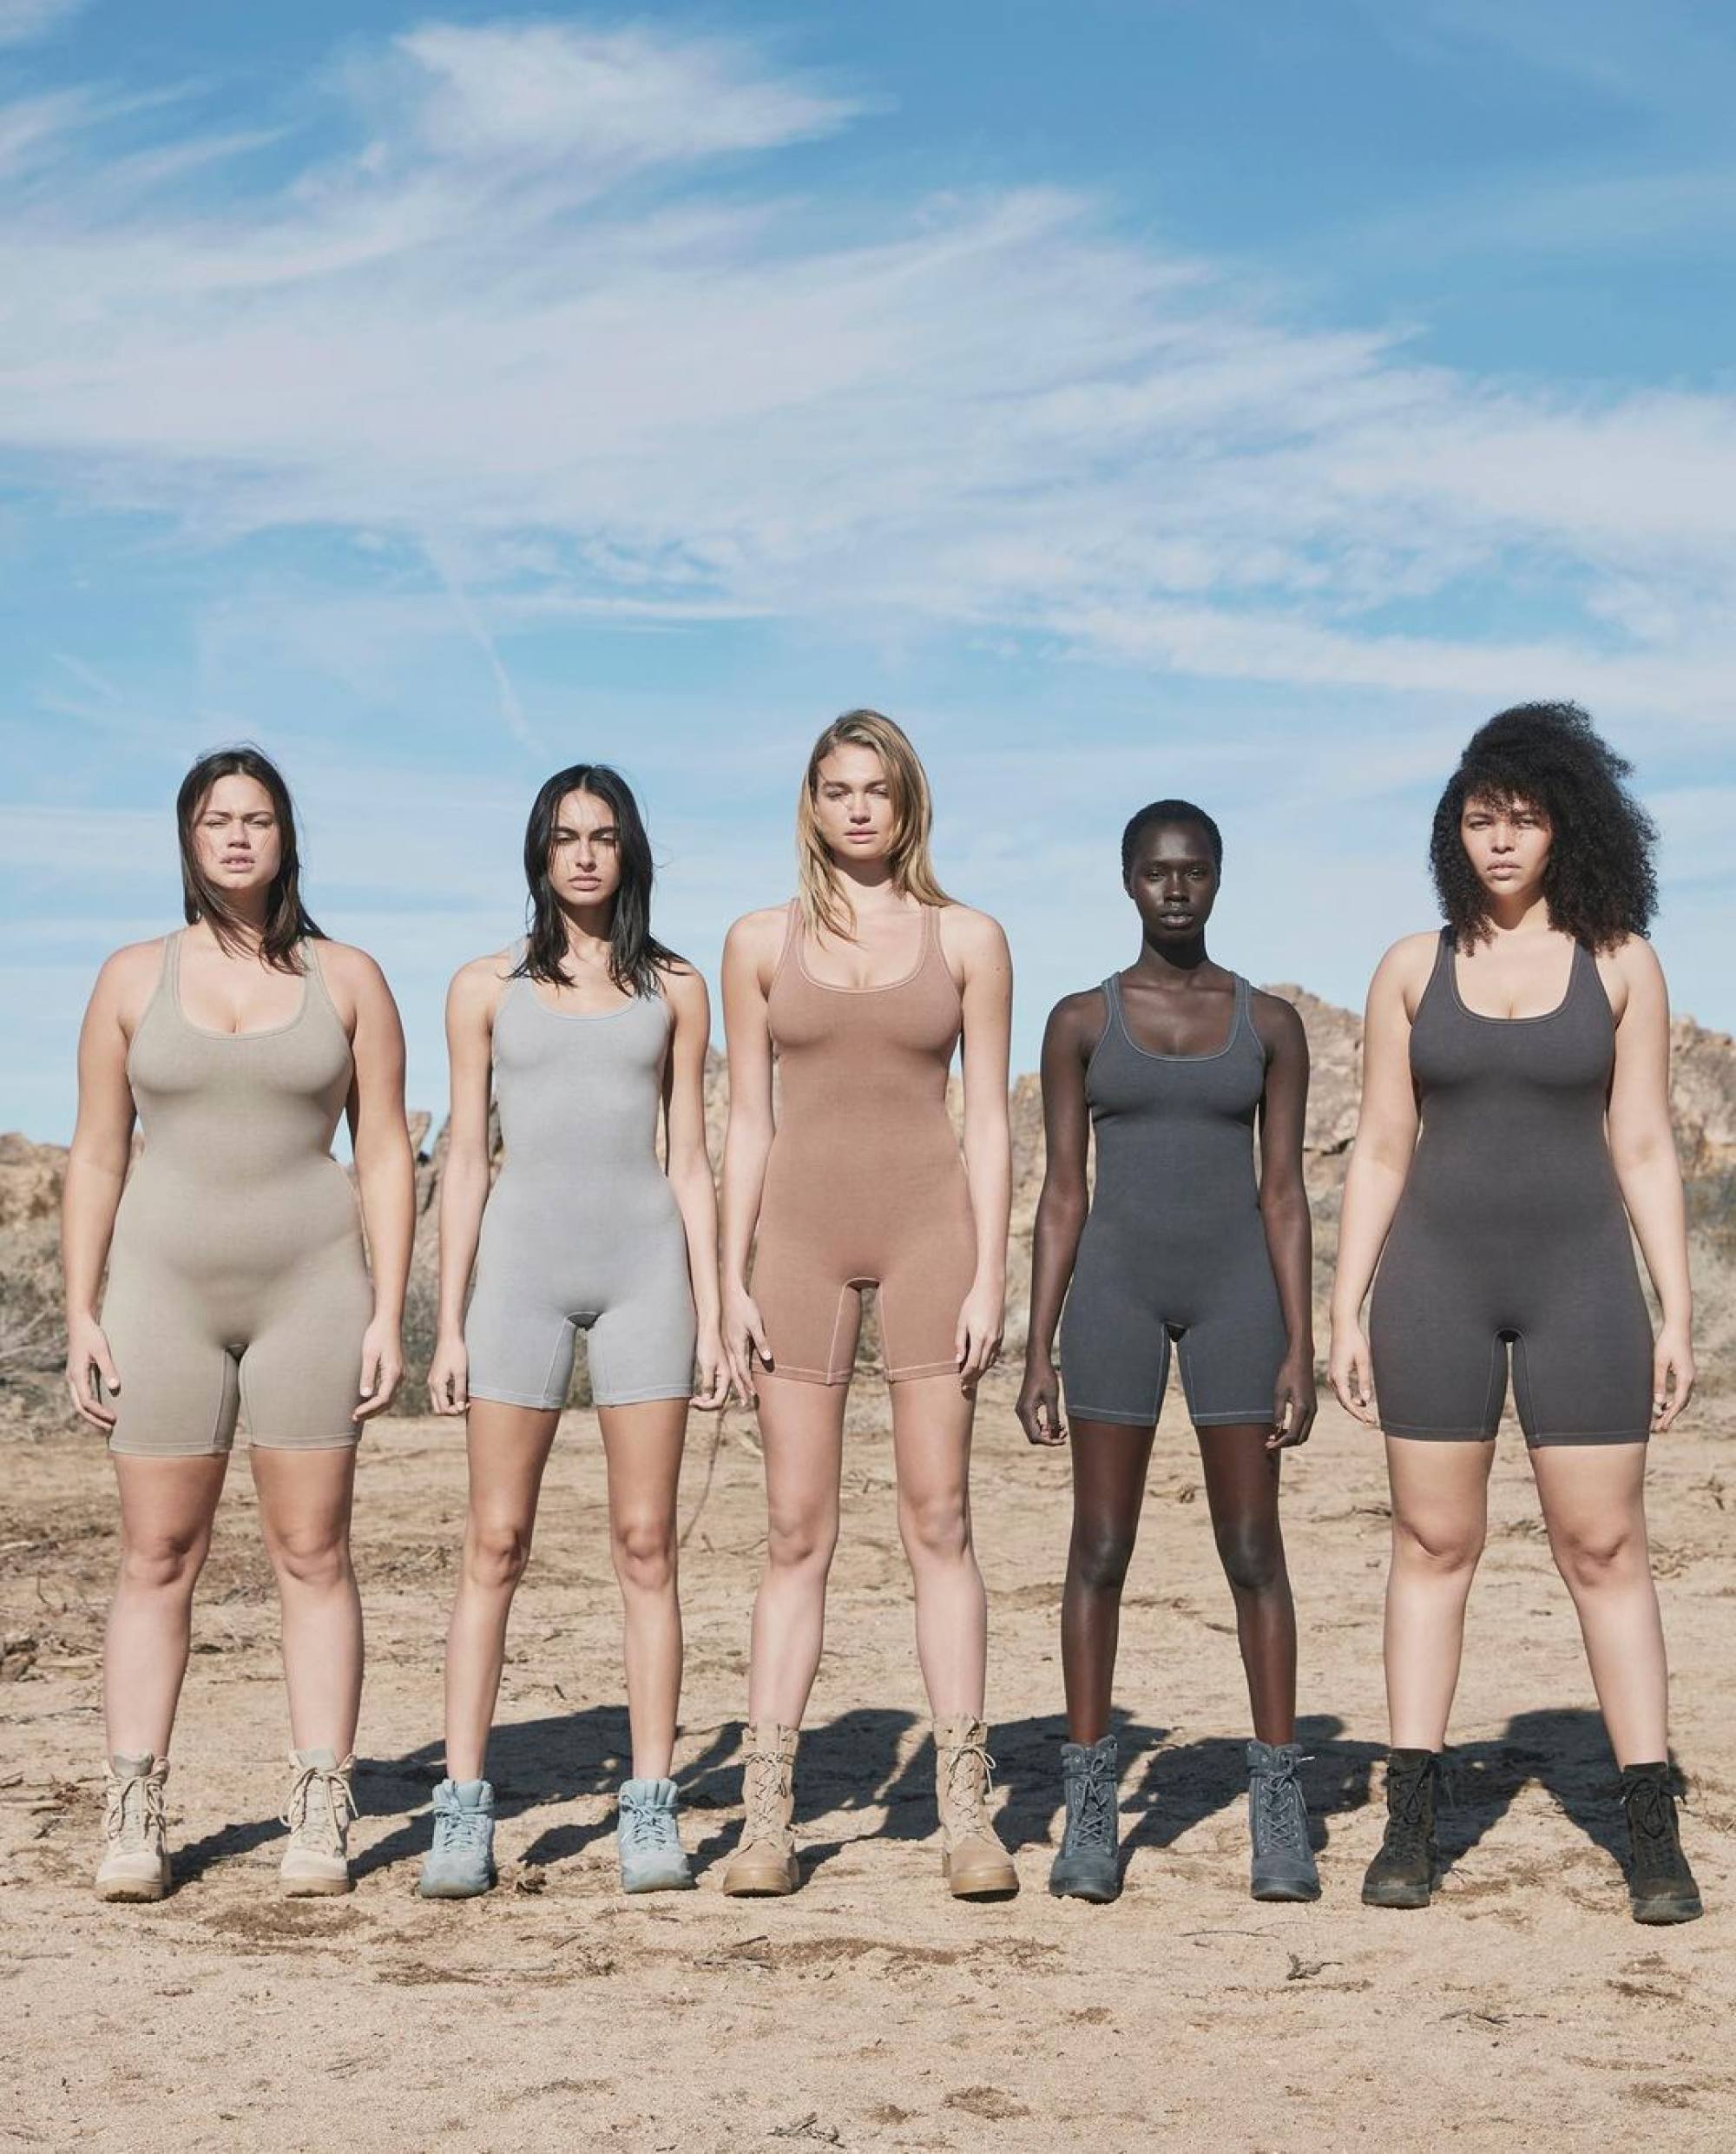 From Kim Kardashian's Skims to classic Spanx, shapewear is in demand as  brands shift to body positivity and inclusivity